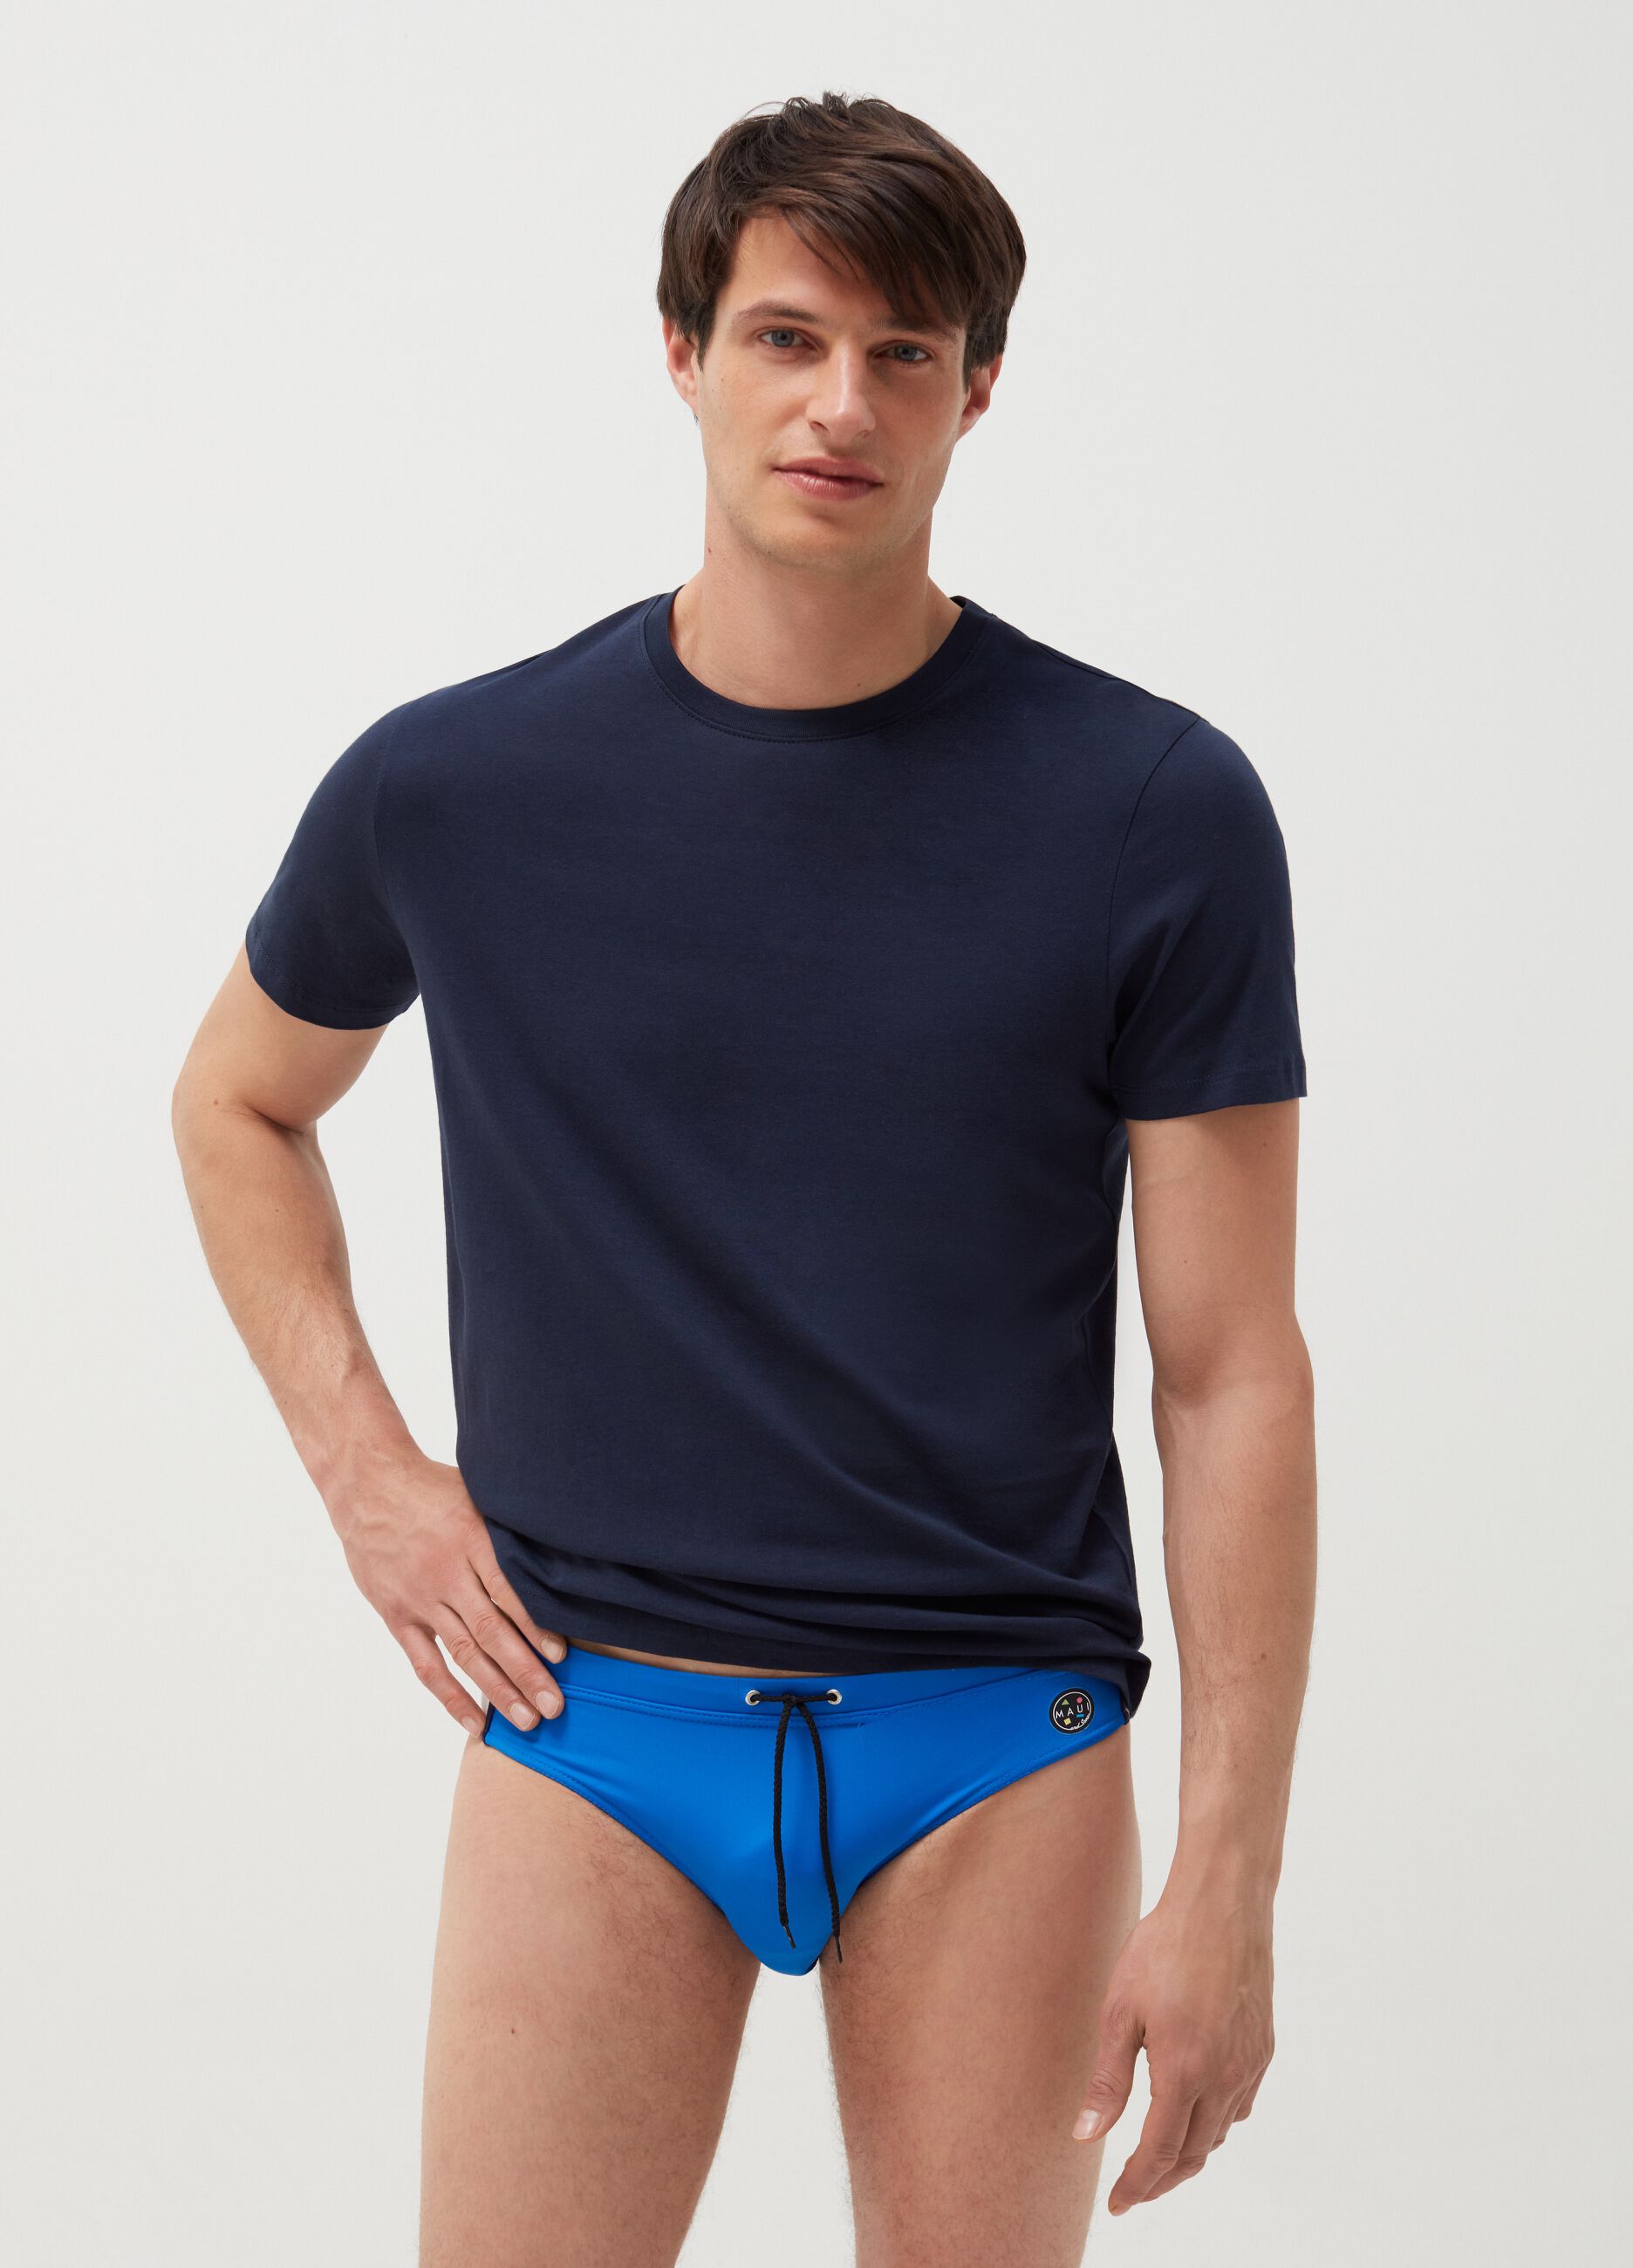 Maui and Sons swim briefs with drawstring